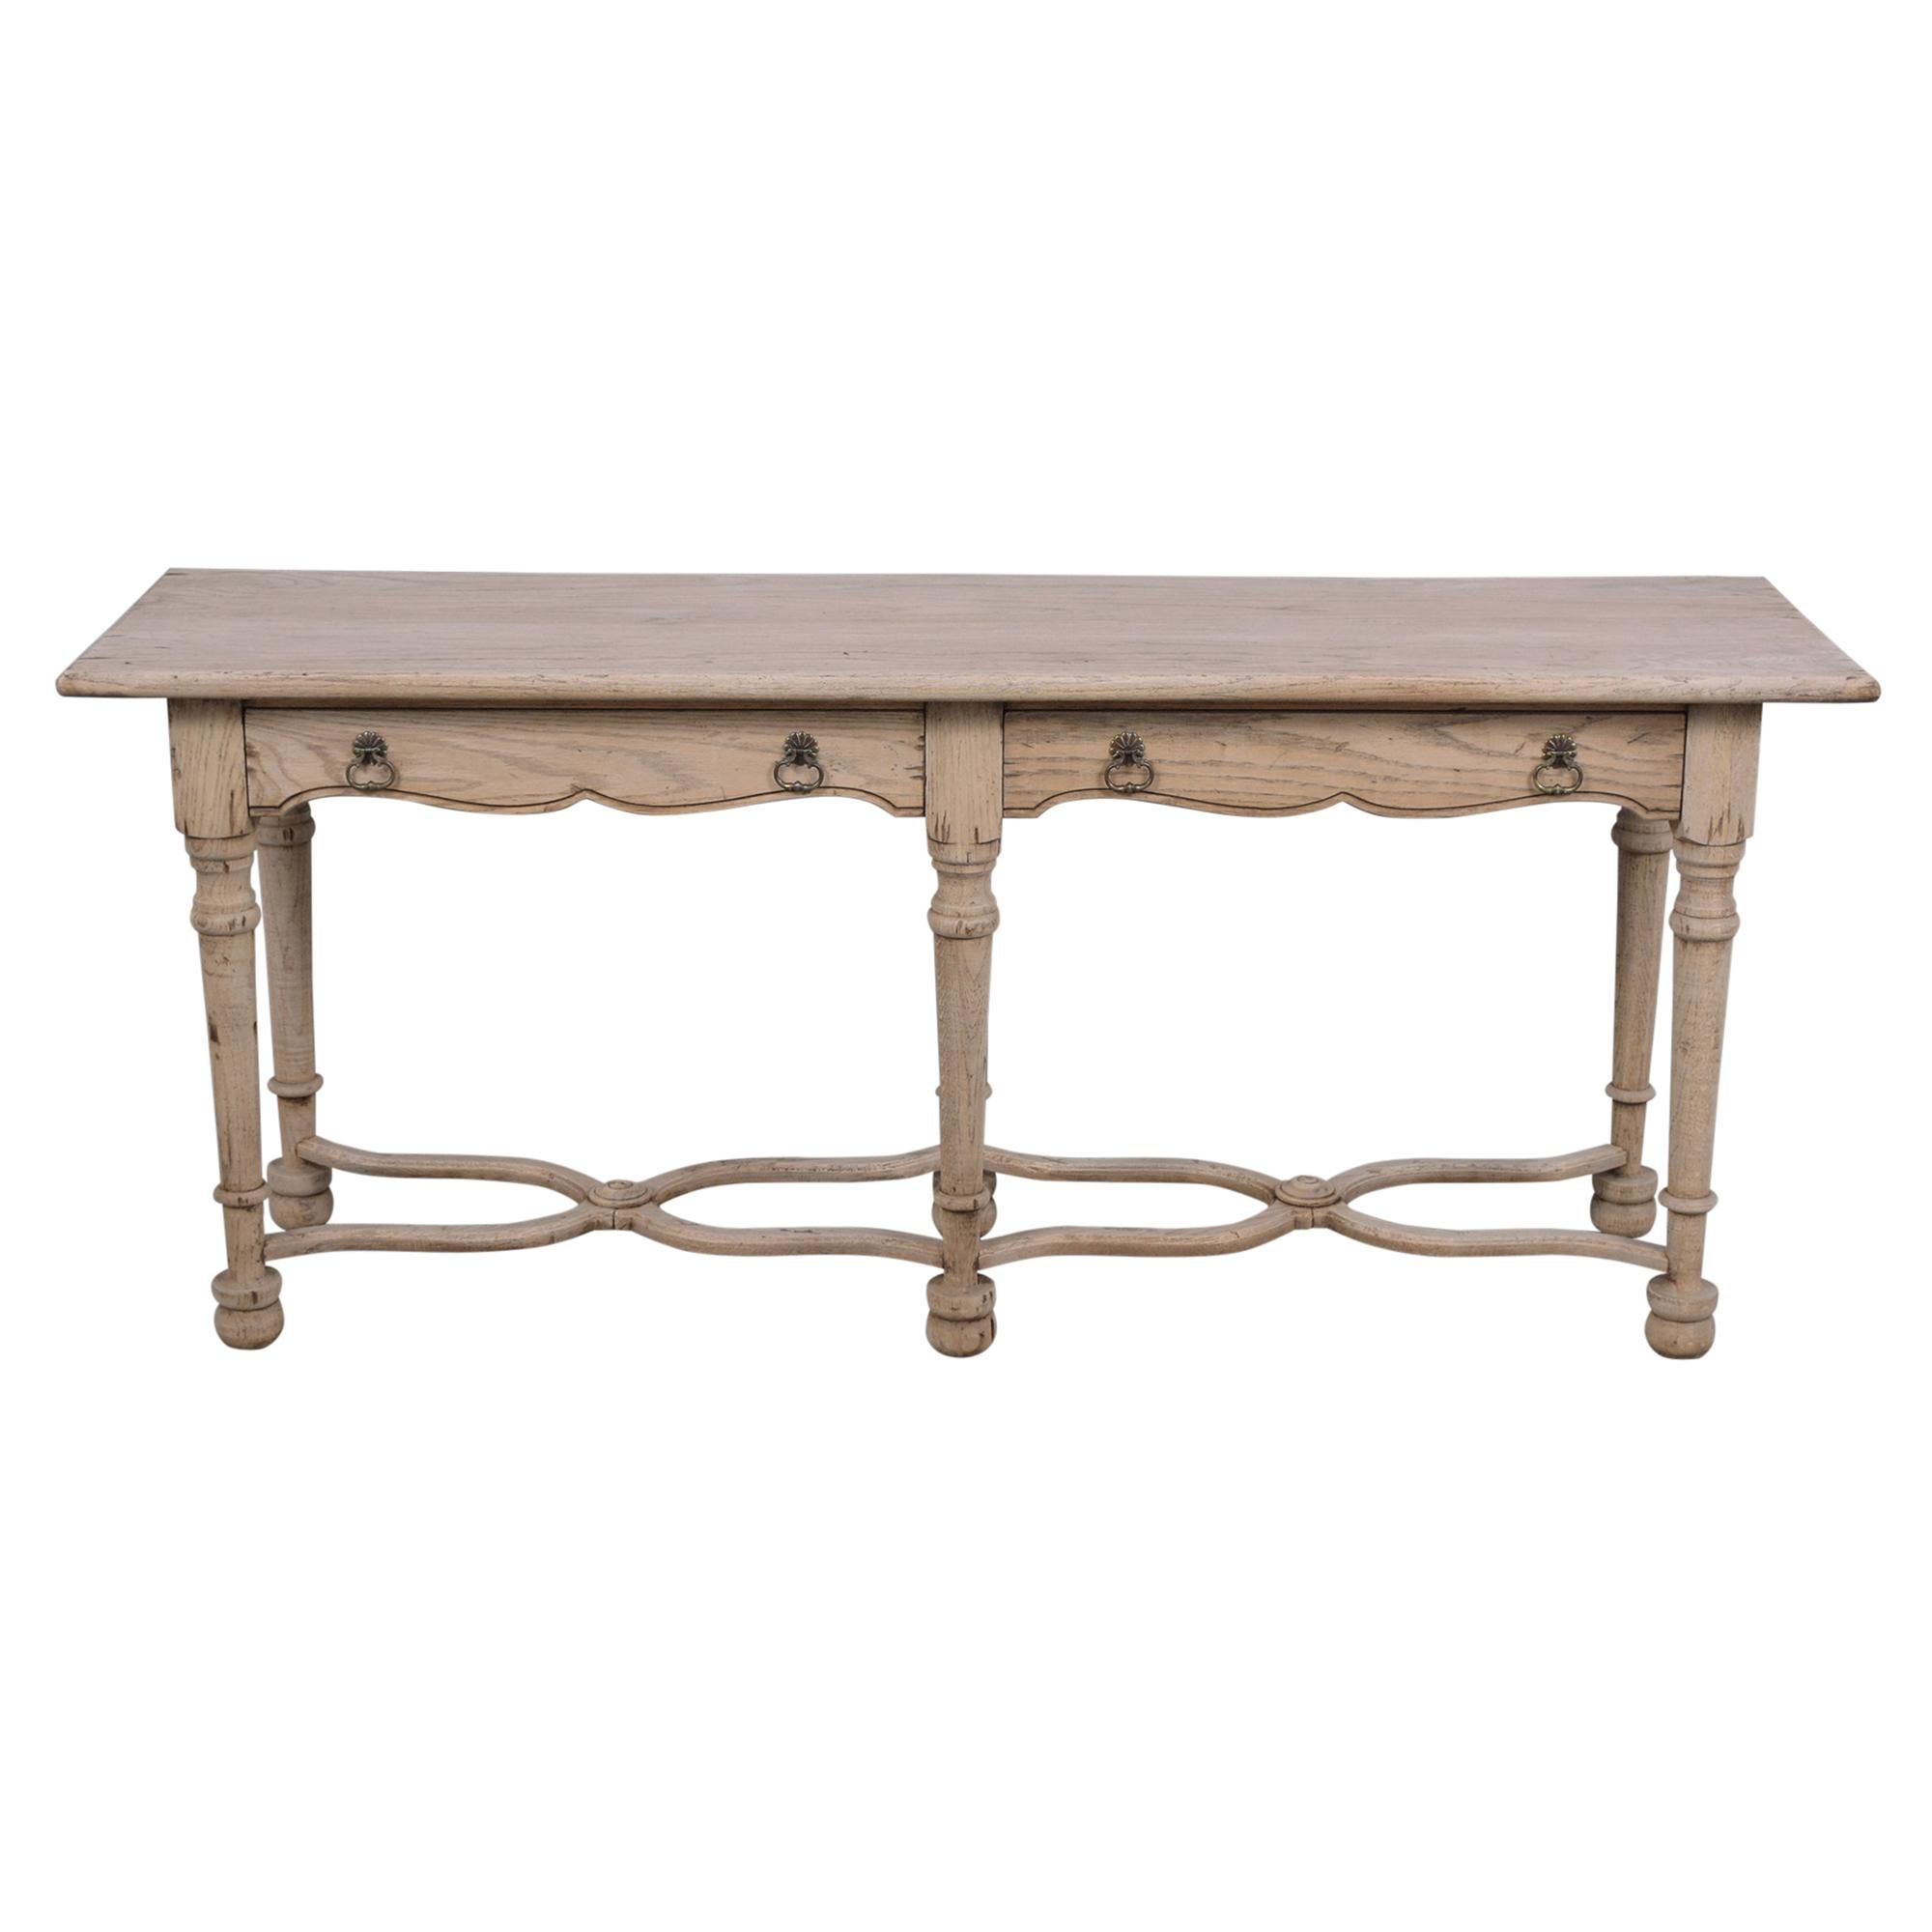 This beautiful vintage Spanish-style console table is in great condition hand-crafted out of oak wood with a newly bleached wood finish and has been professionally restored. The vintage sofa table has a large solid wooden top, two large pull-out